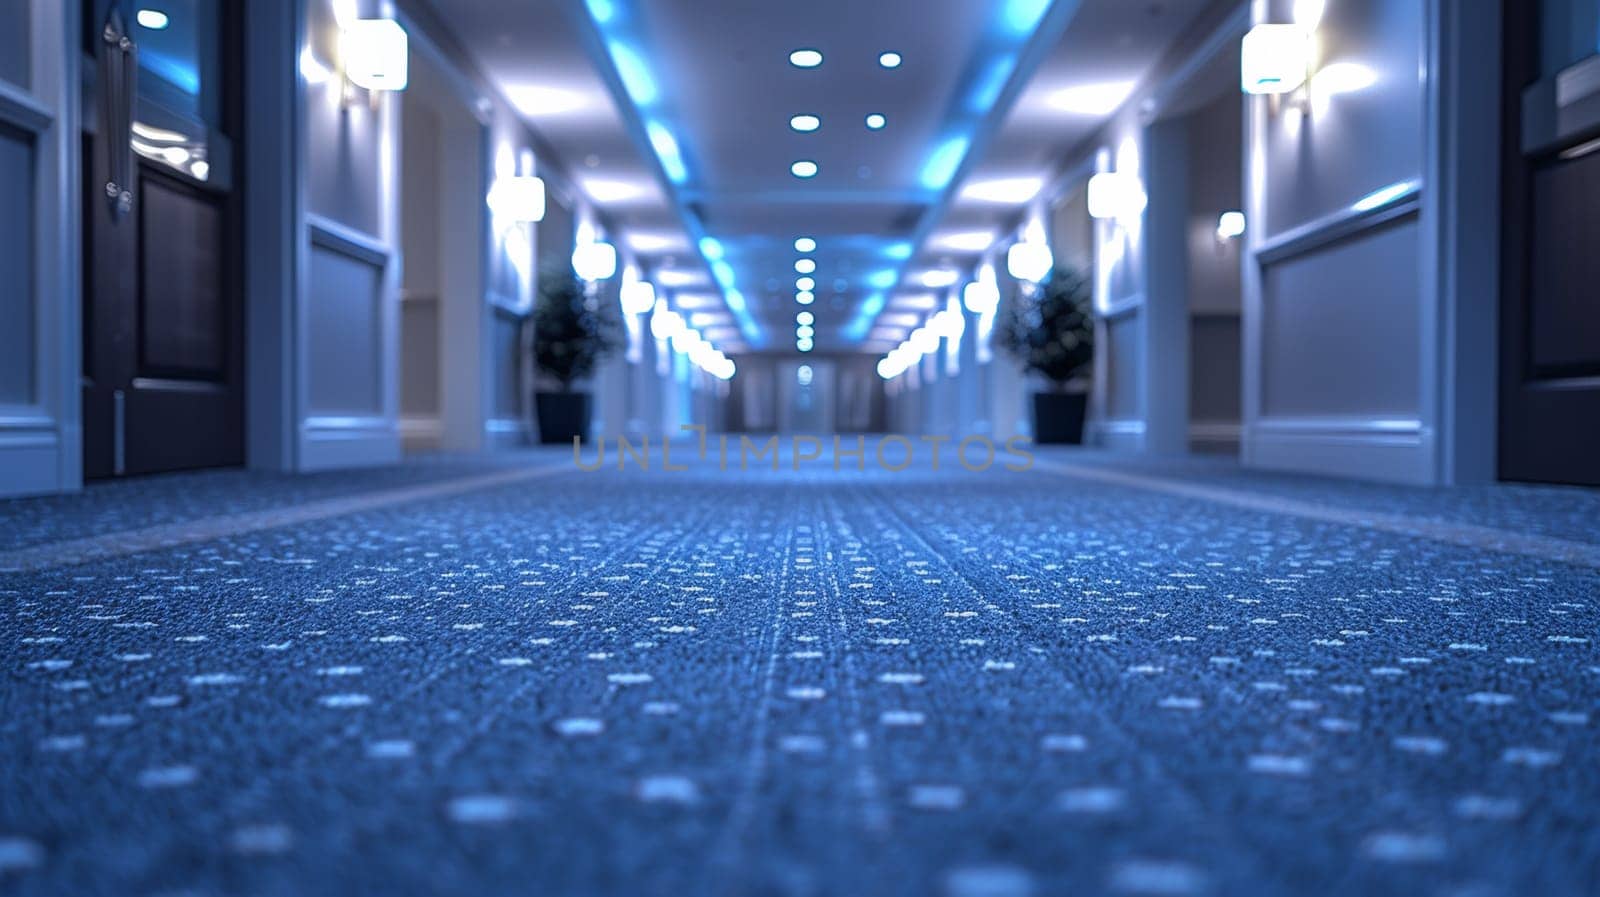 A hallway with blue carpet and lights on the ceiling, AI by starush